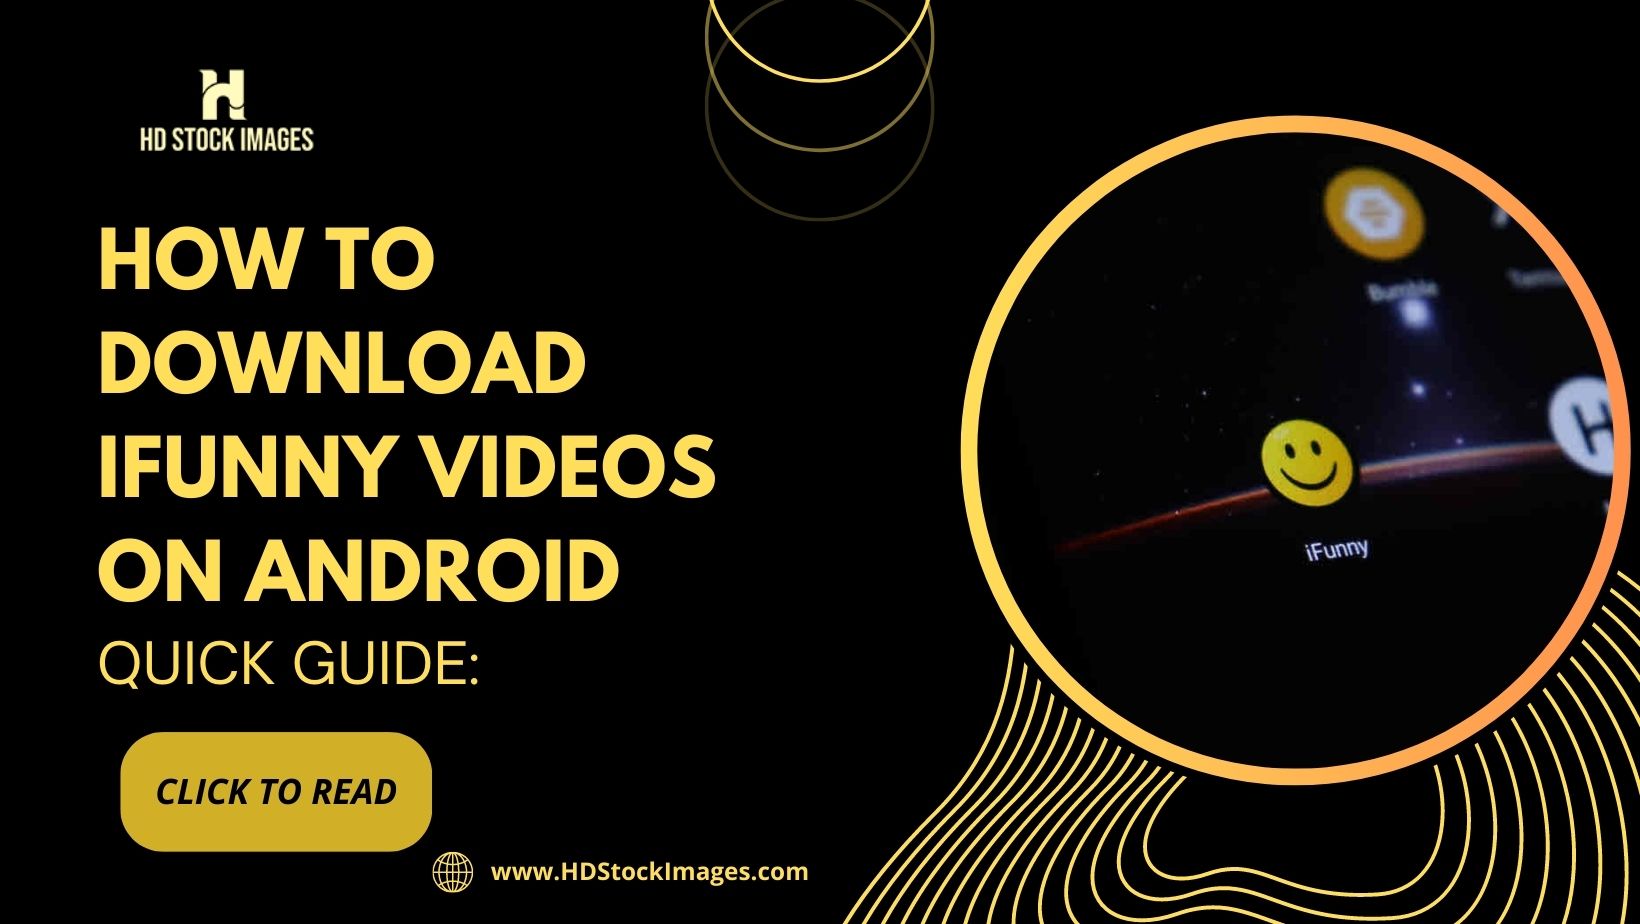 Quick Guide: How to Download Ifunny Videos on Android